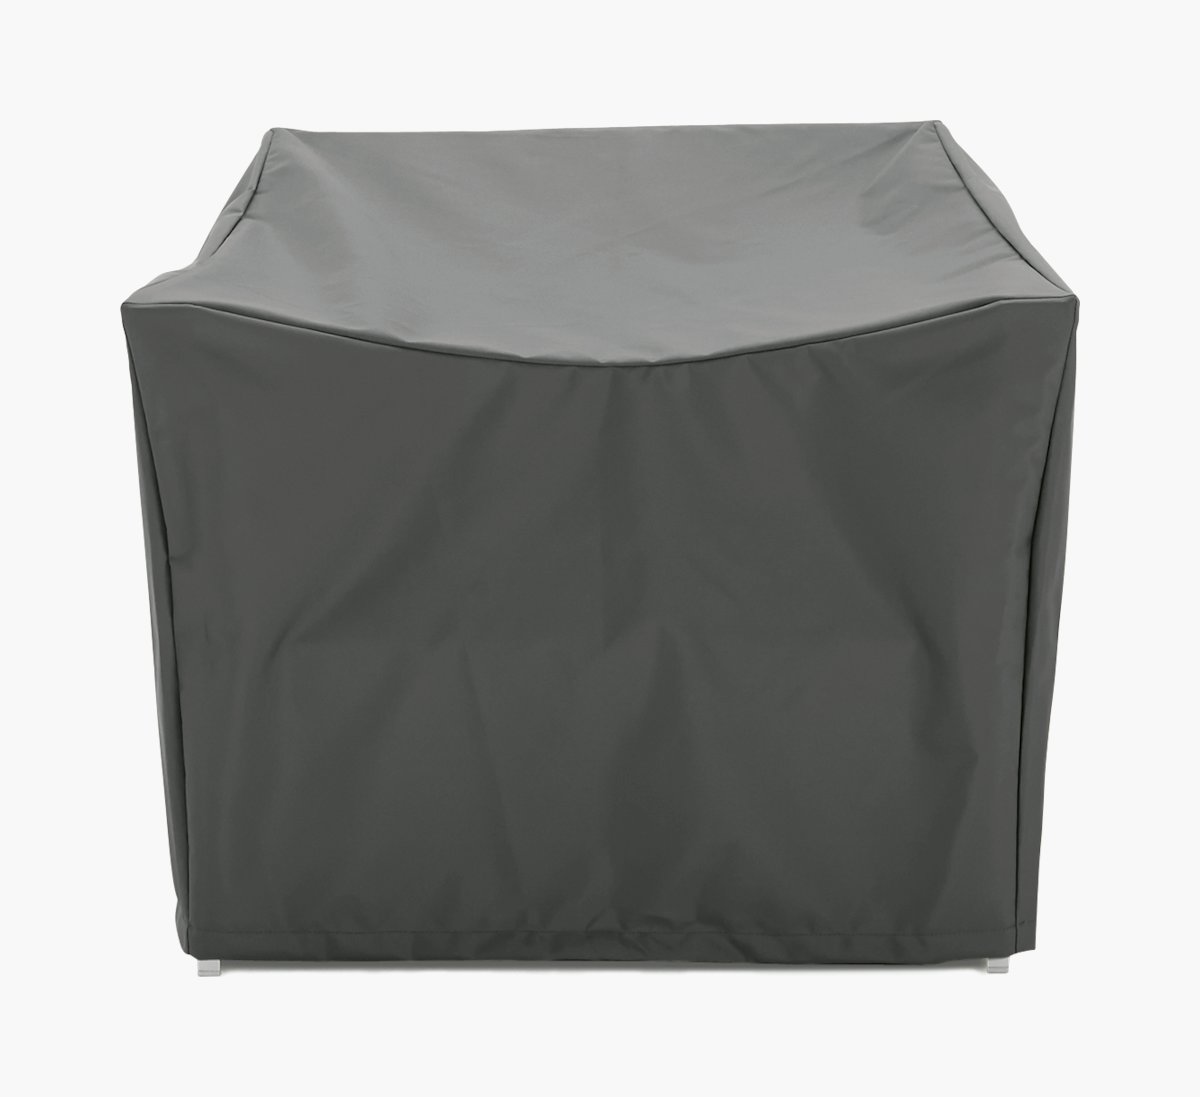 Eos Lounge Chair Cover